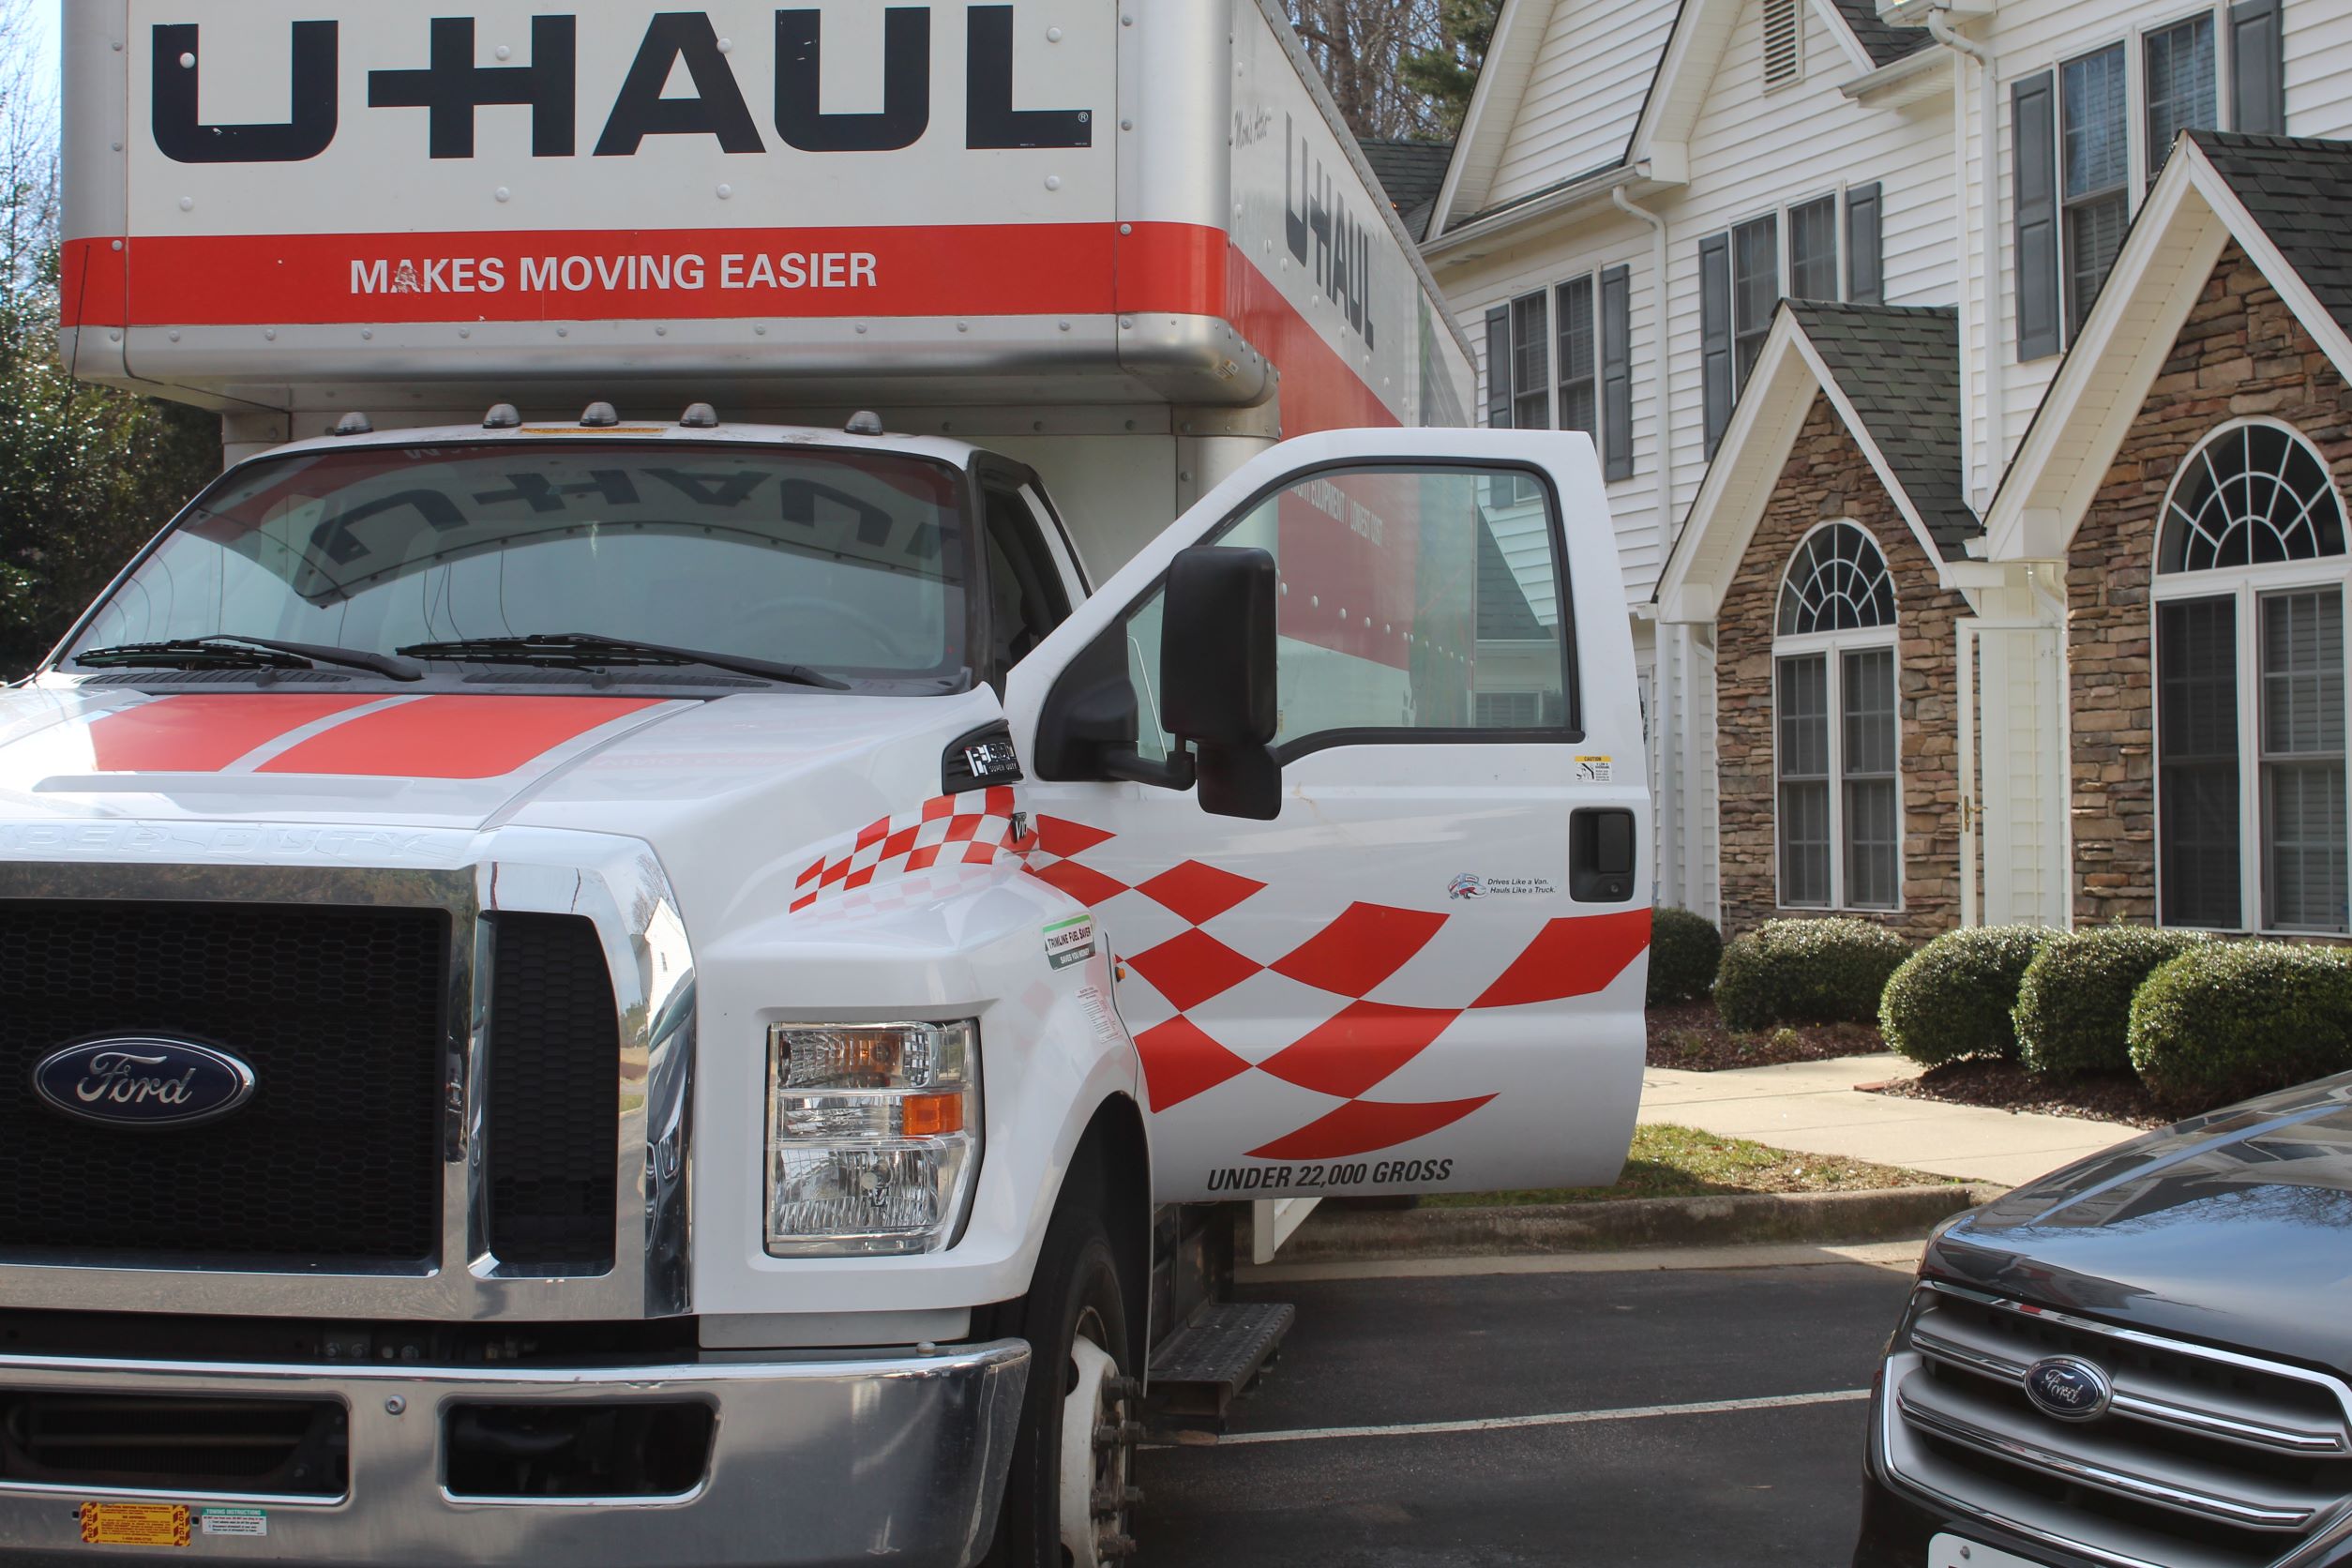 Best moving company in Cary, Apex and Raleigh.